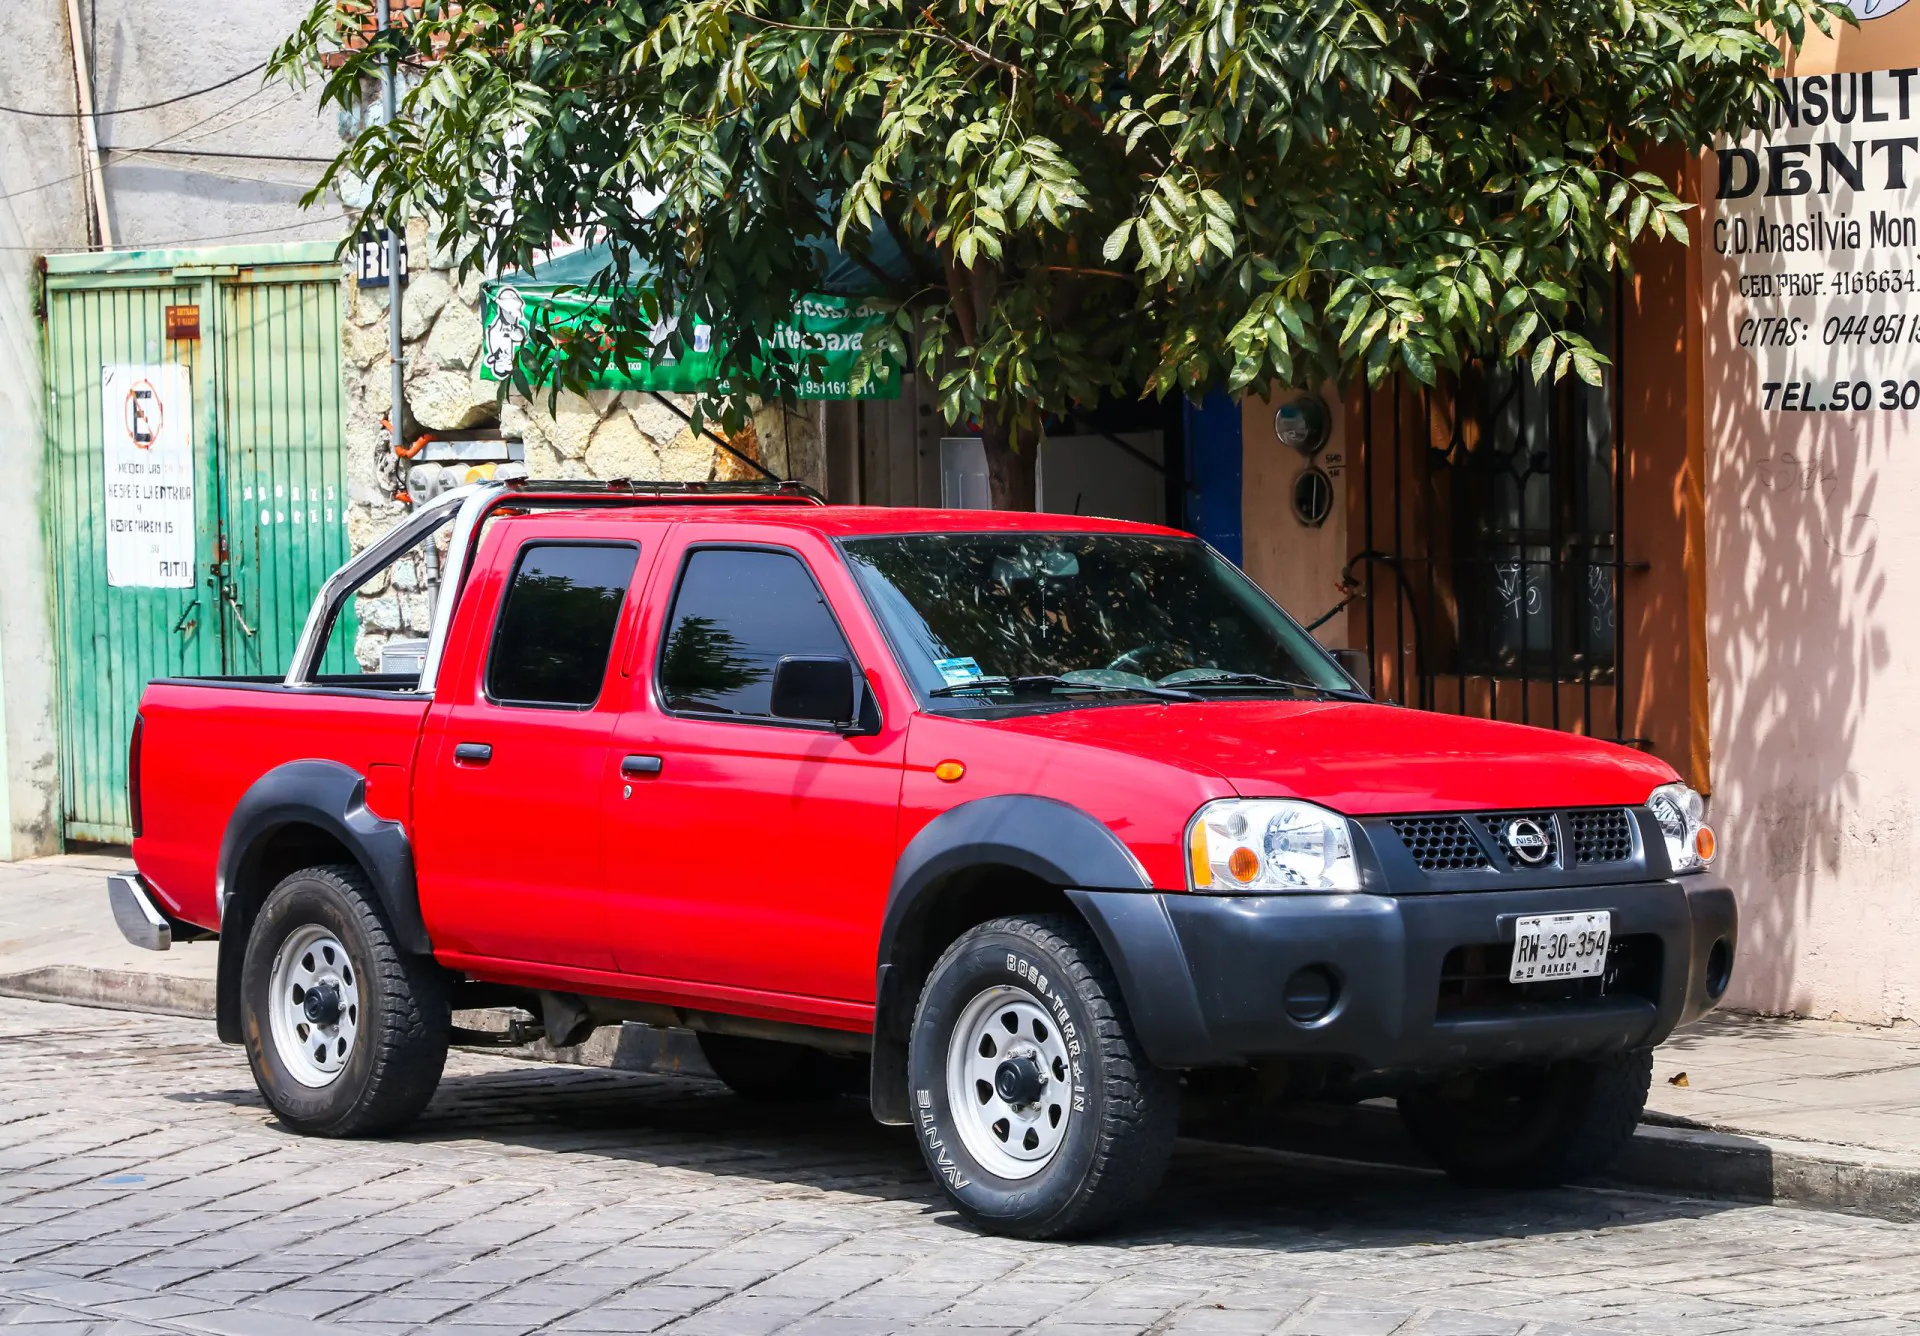 2013 Red pickup truck Nissan Frontier in the city street.